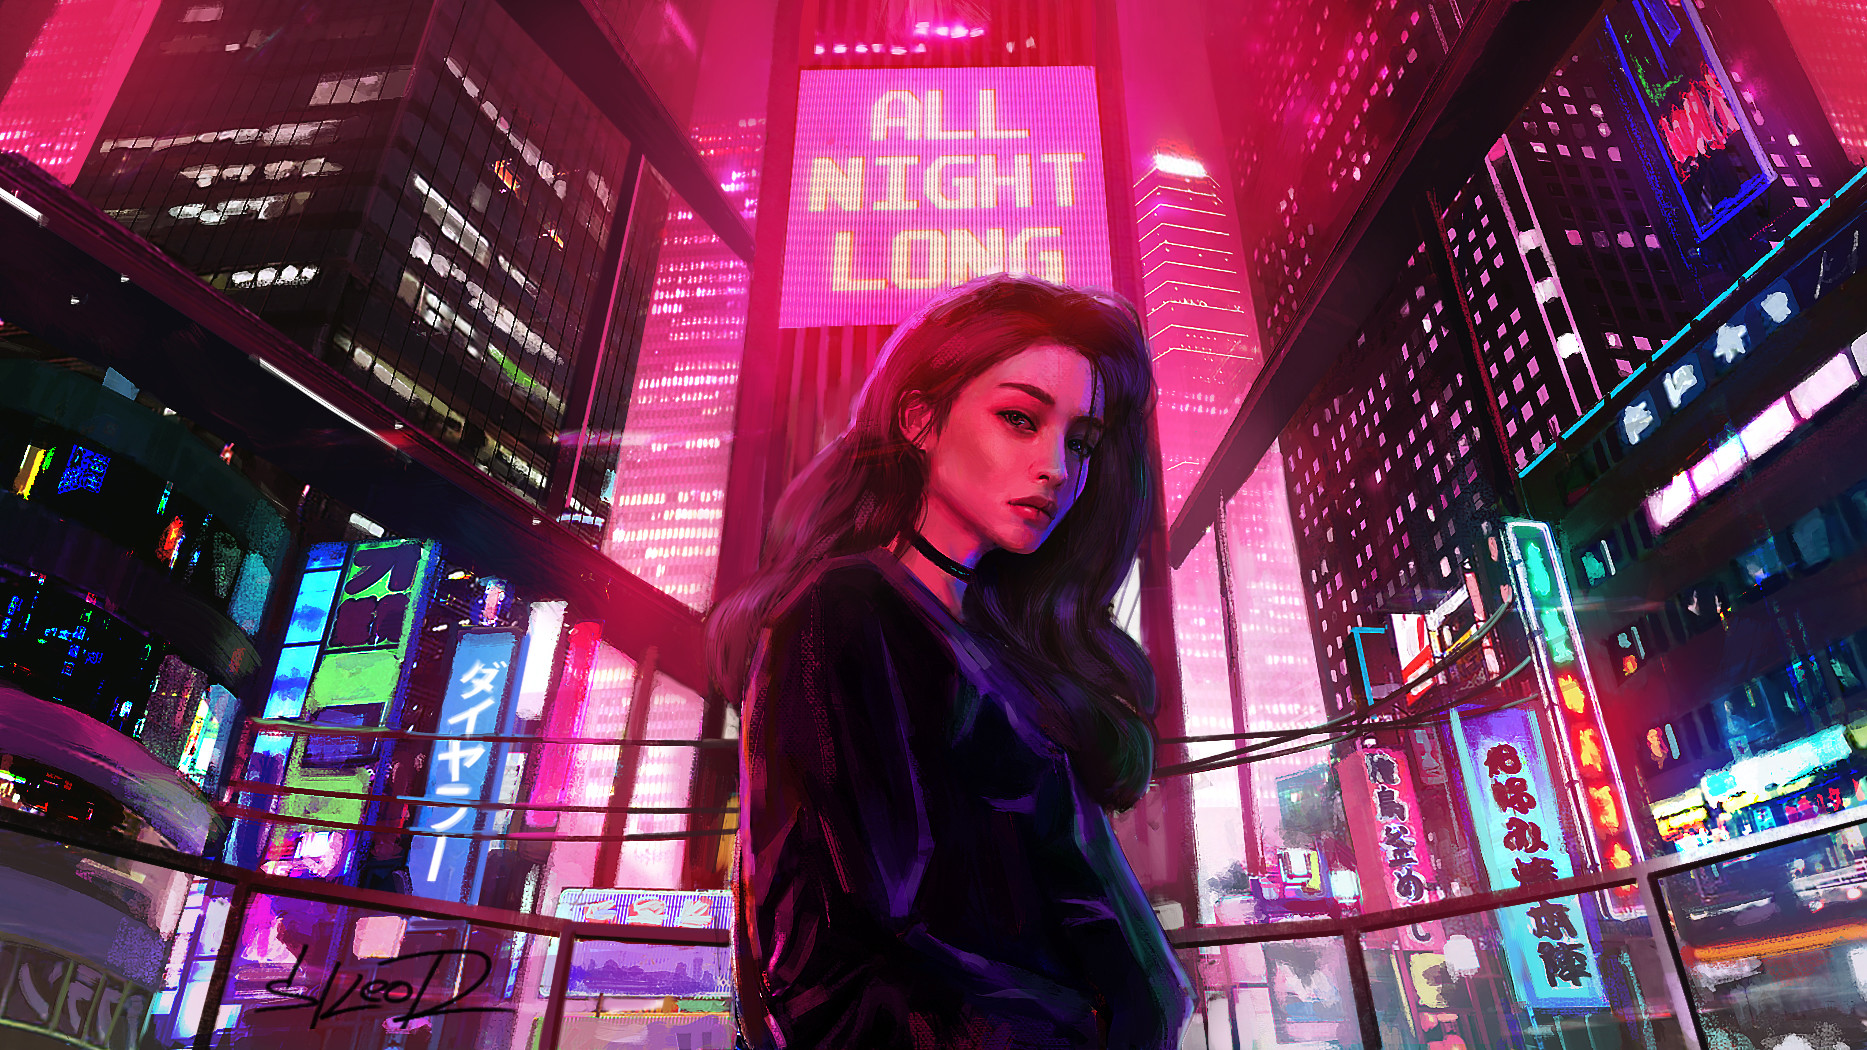 Neo-noir-inspired Conceptual Illustrations by Tony Skeor